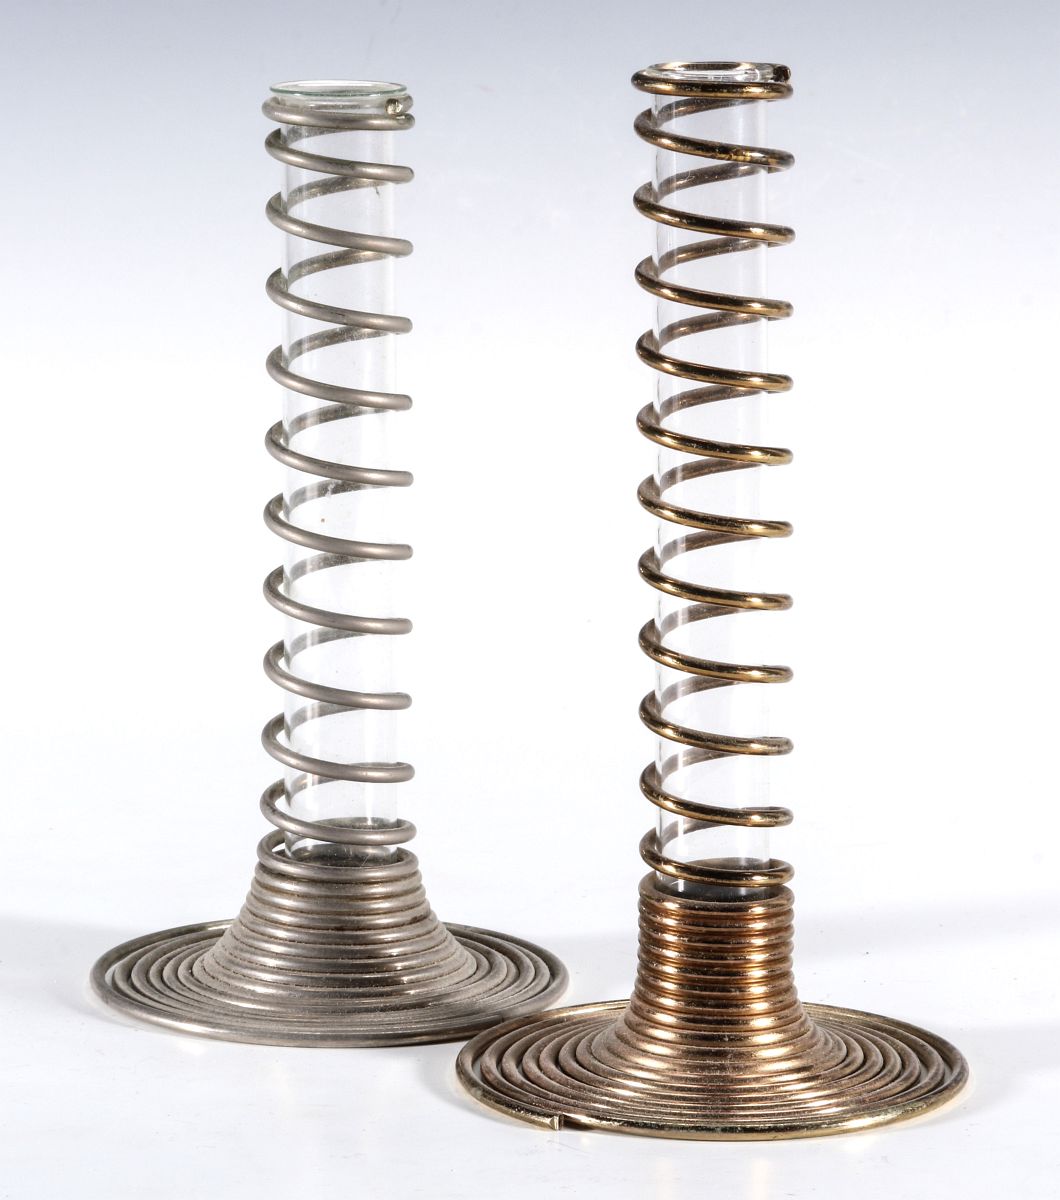 A PAIR COILED RAILROAD DINING CAR BUD VASES